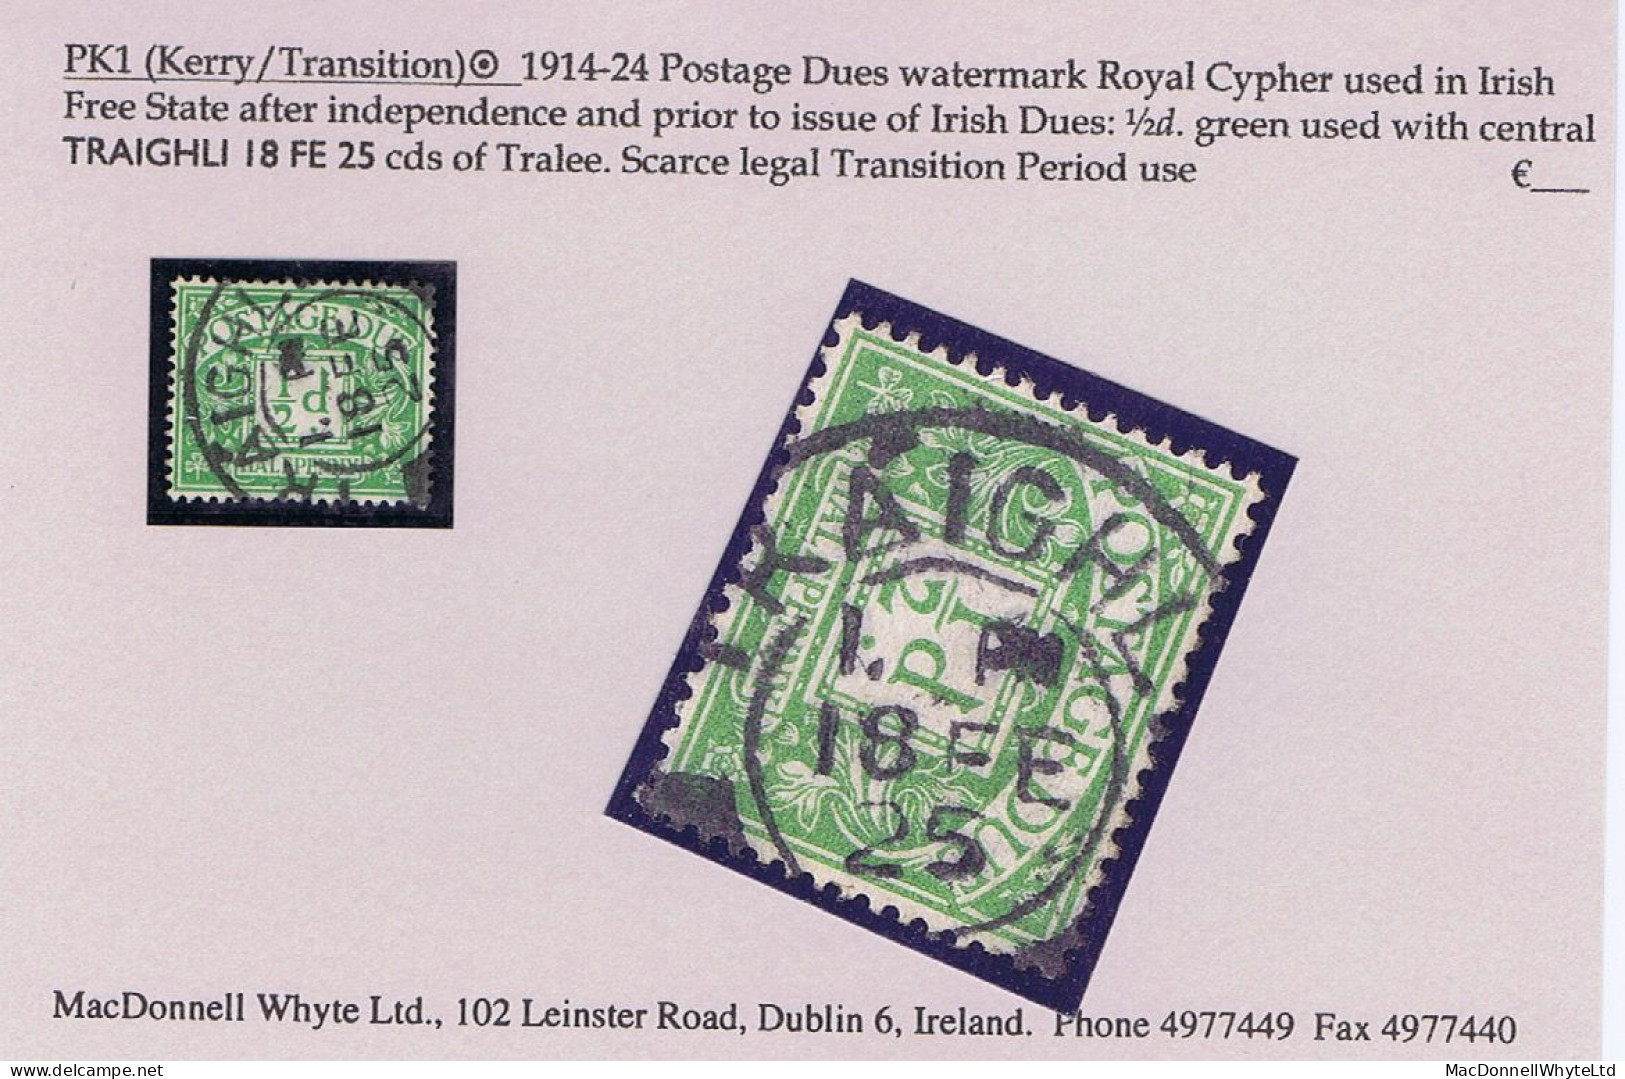 Ireland Postage Due Transition Kerry 1925 Great Britain Halfpenny Green Tralee Cds In Irish TRAIGHLI 18 FE 25 - Timbres-taxe